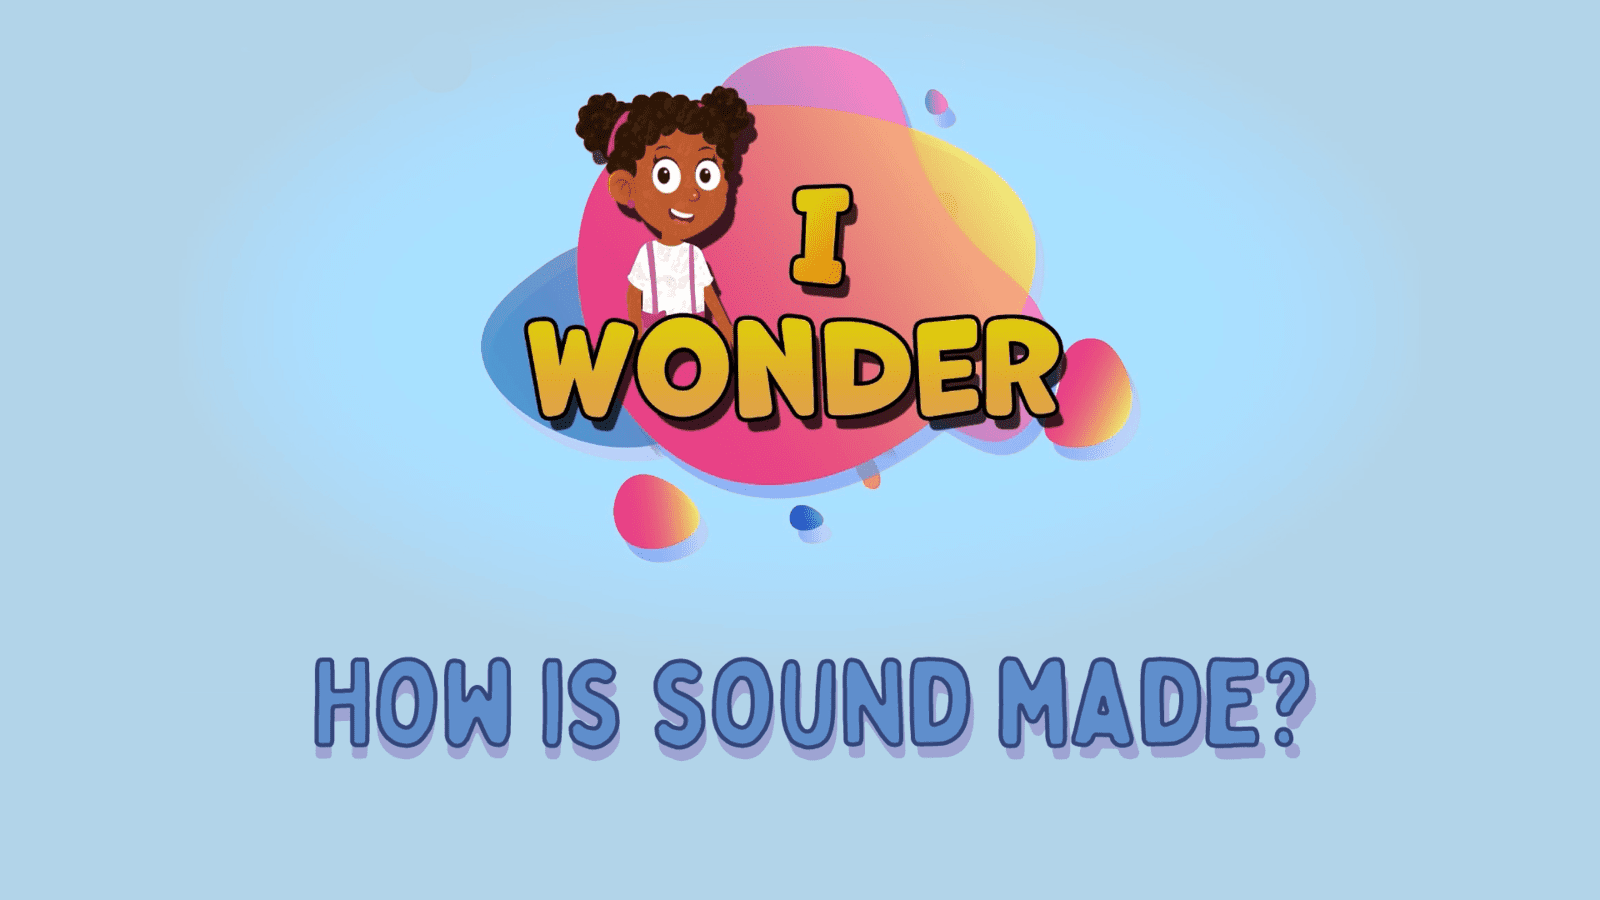 How Is Sound Made?